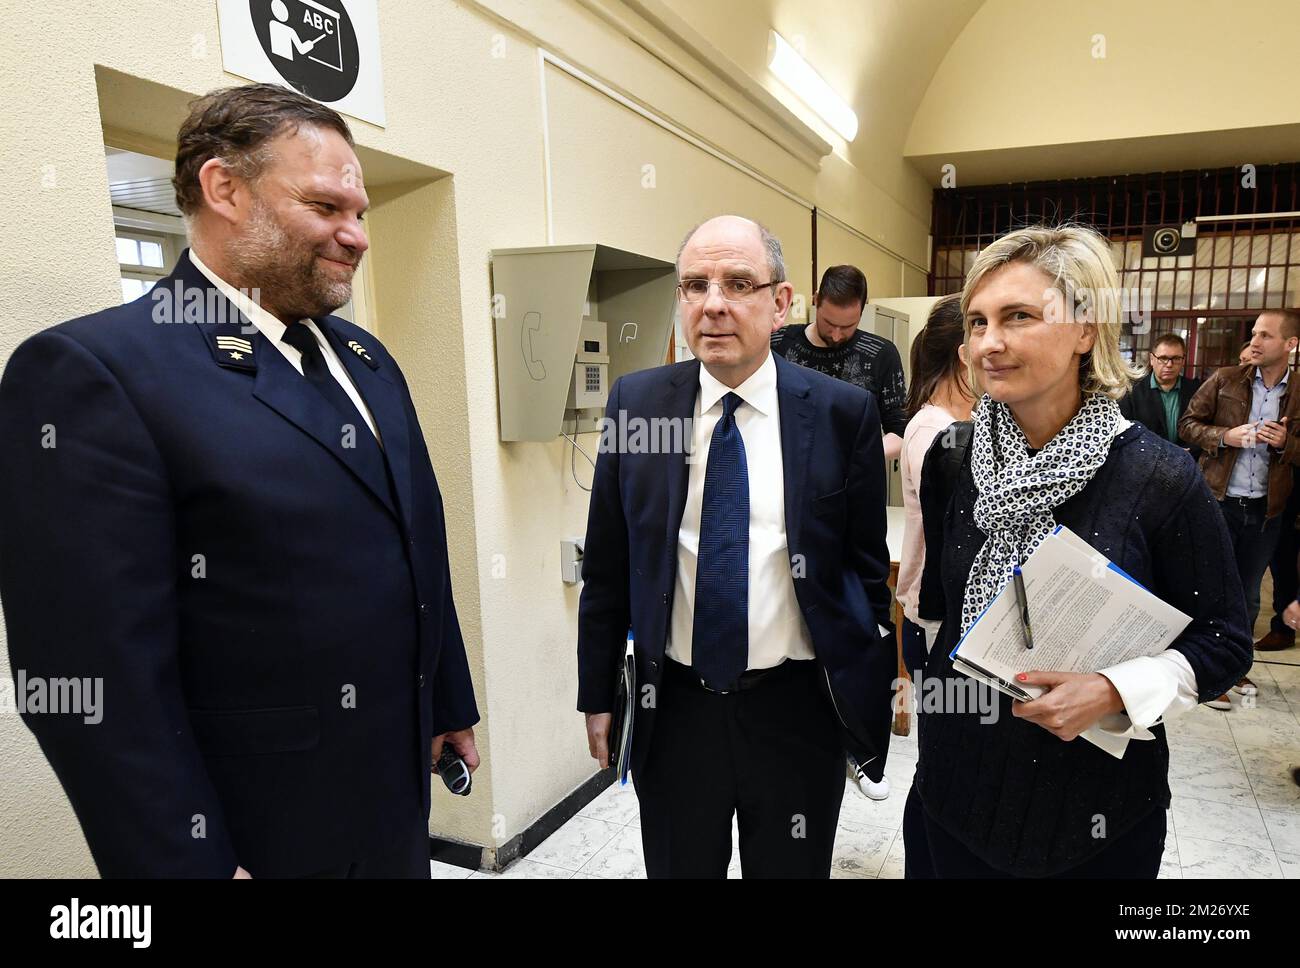 Antwerp prison's Karel Buyse, Minister of Justice Koen Geens and Flemish Minister of Education Hilde Crevits pictured during a visit to the Antwerp prison, Monday 08 May 2017. BELGA PHOTO ERIC LALMAND  Stock Photo